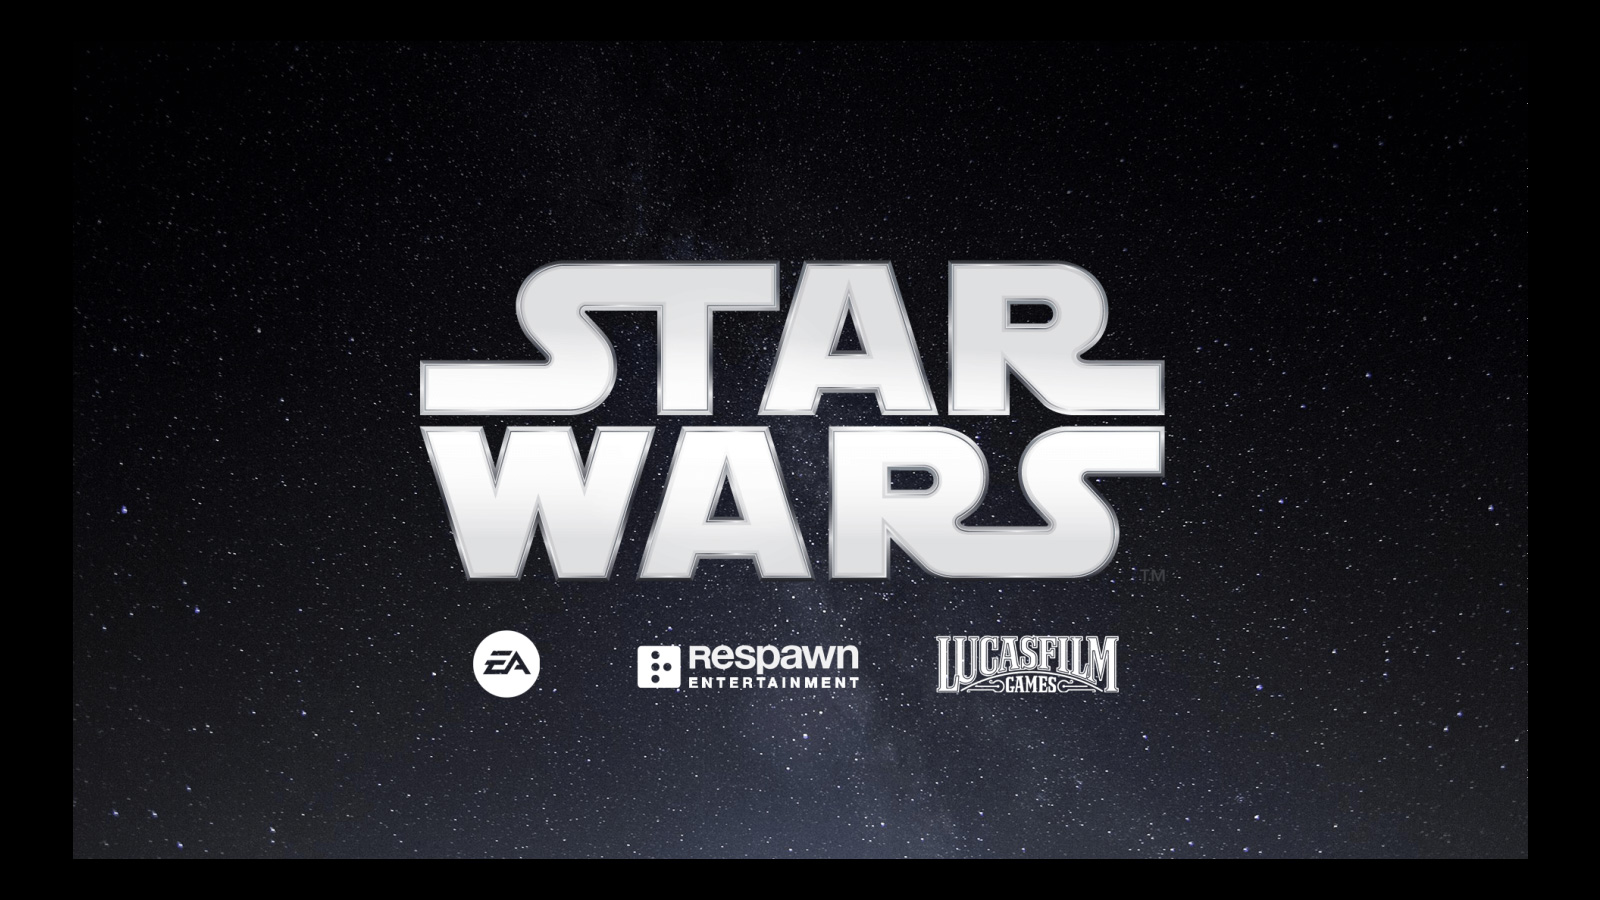 New Star Wars Video Games Announcment From Electronic Arts & Lucasfilm Games